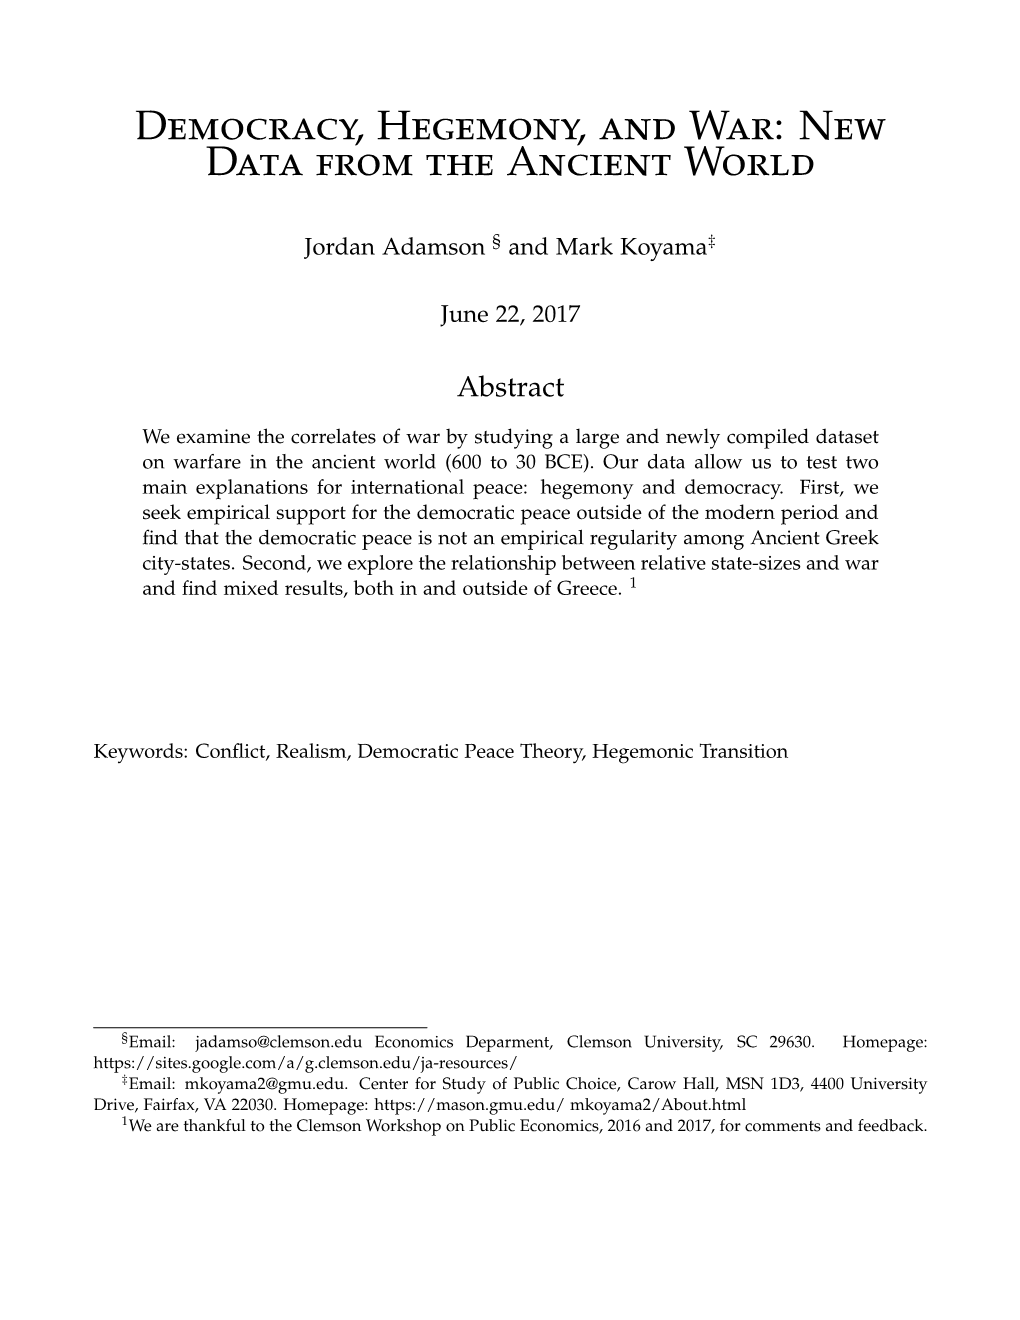 Democracy, Hegemony, and War: New Data from the Ancient World